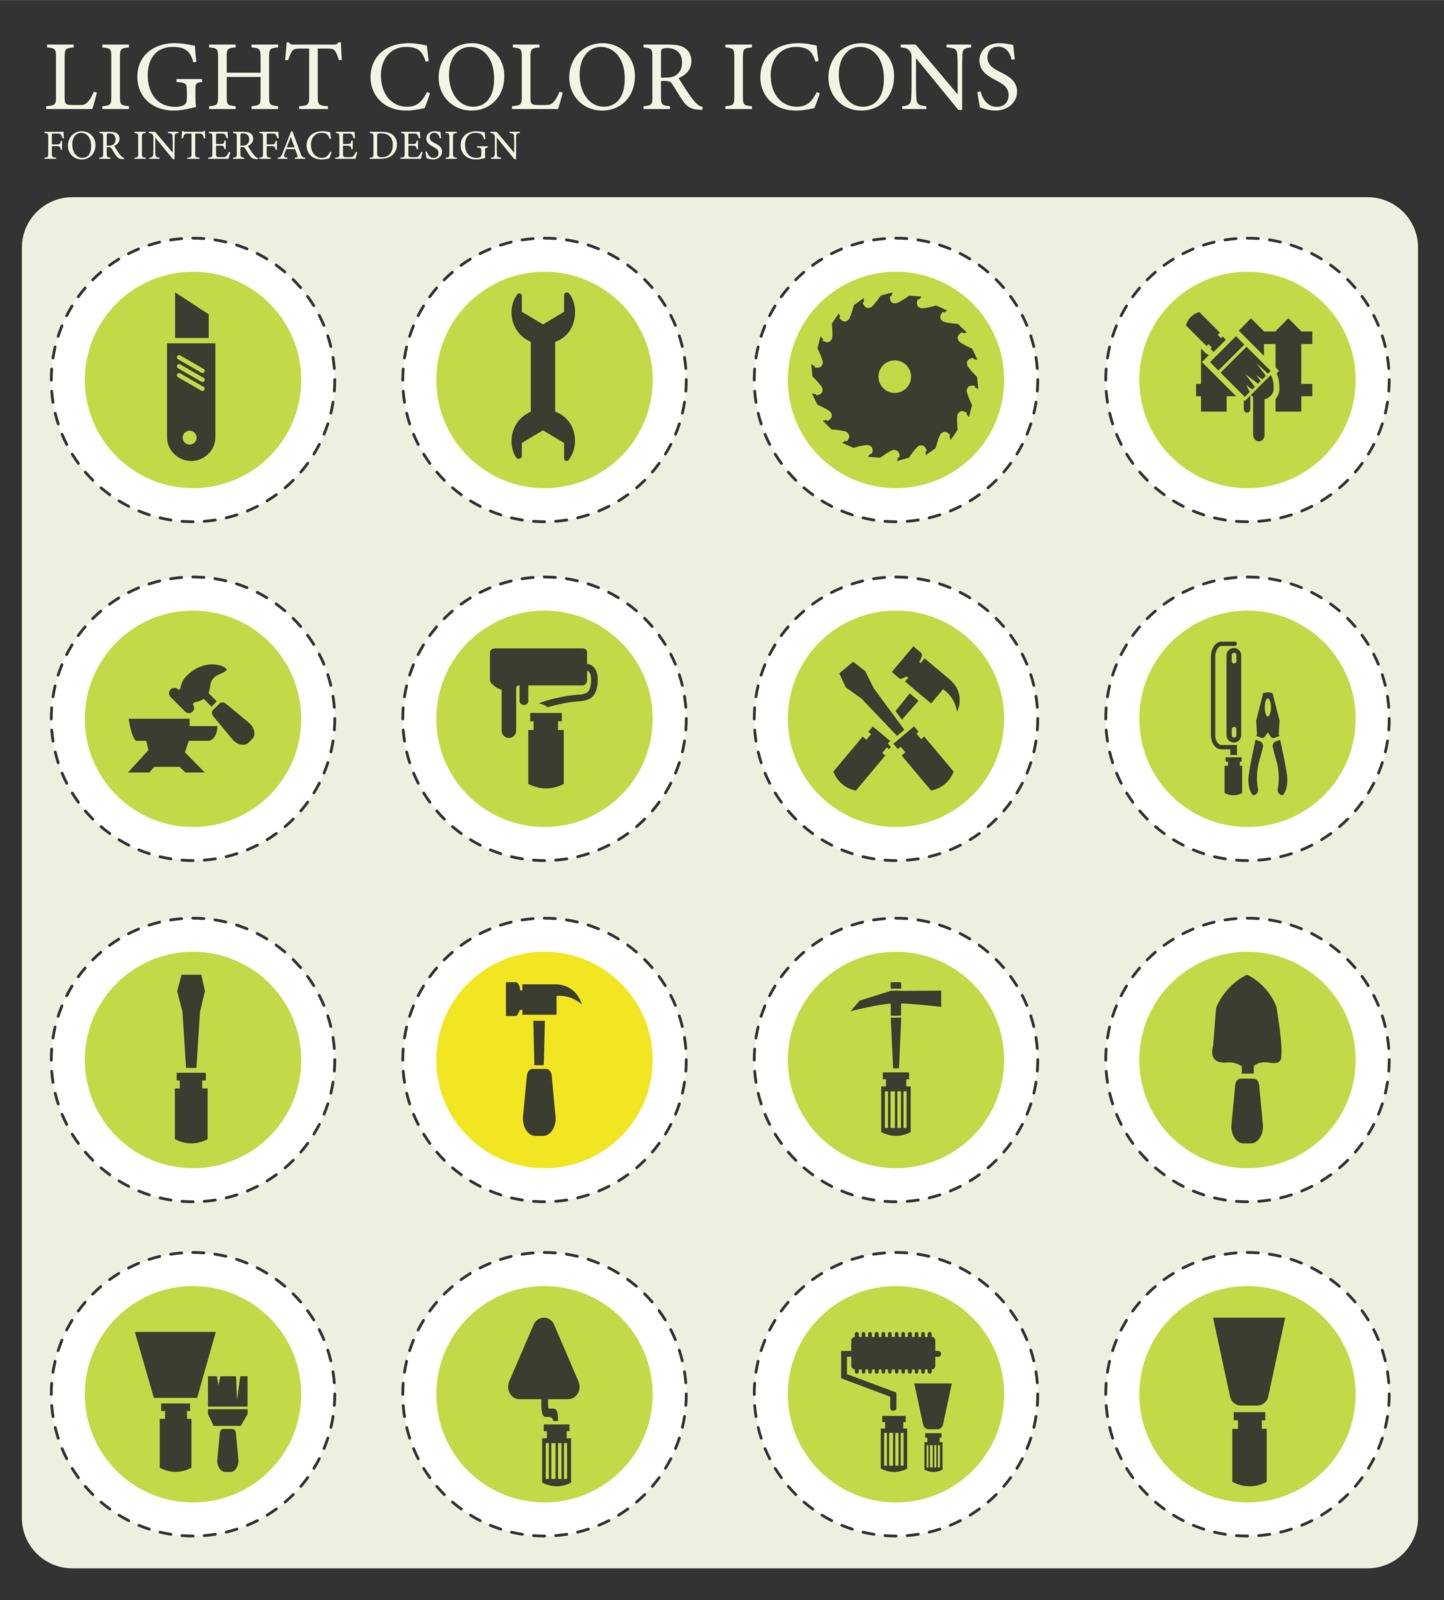 Work tools icon set for web sites and user interface